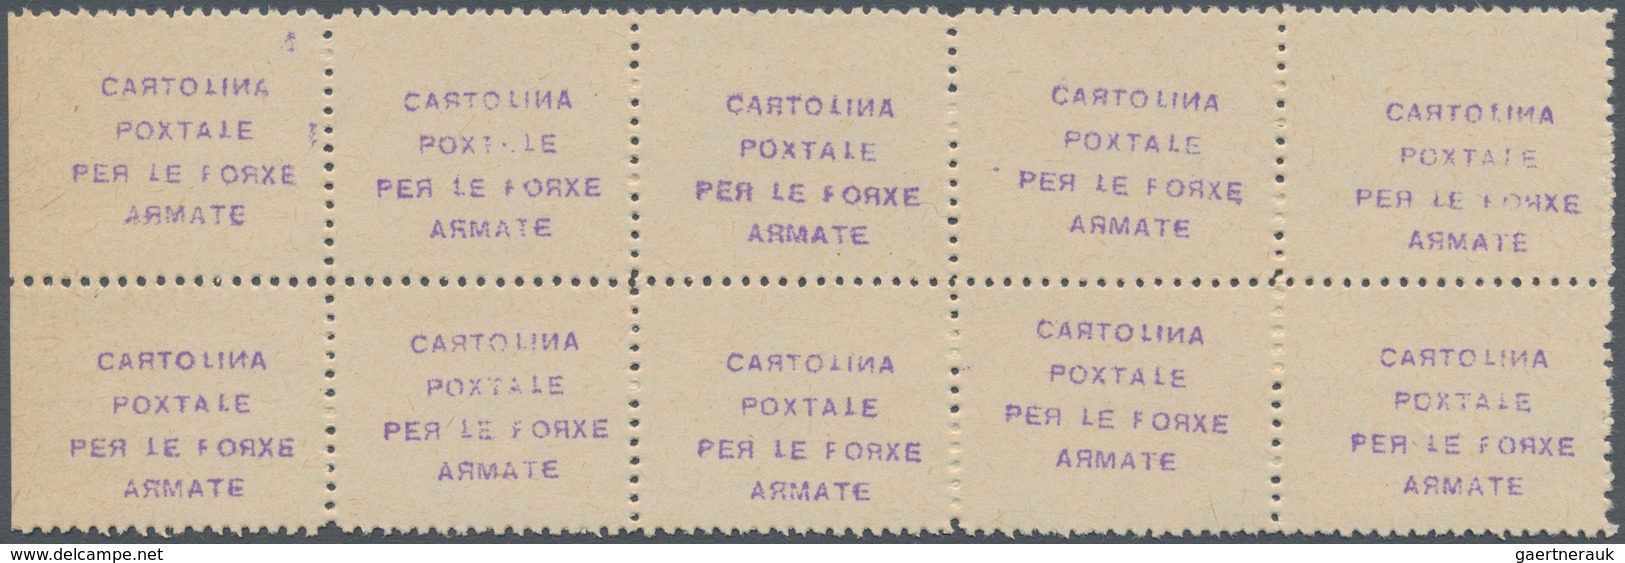 01055 Italien - Besonderheiten: 1941, Postage Free Labels For Postcards: Printed In Violet On Yellowish Pa - Unclassified